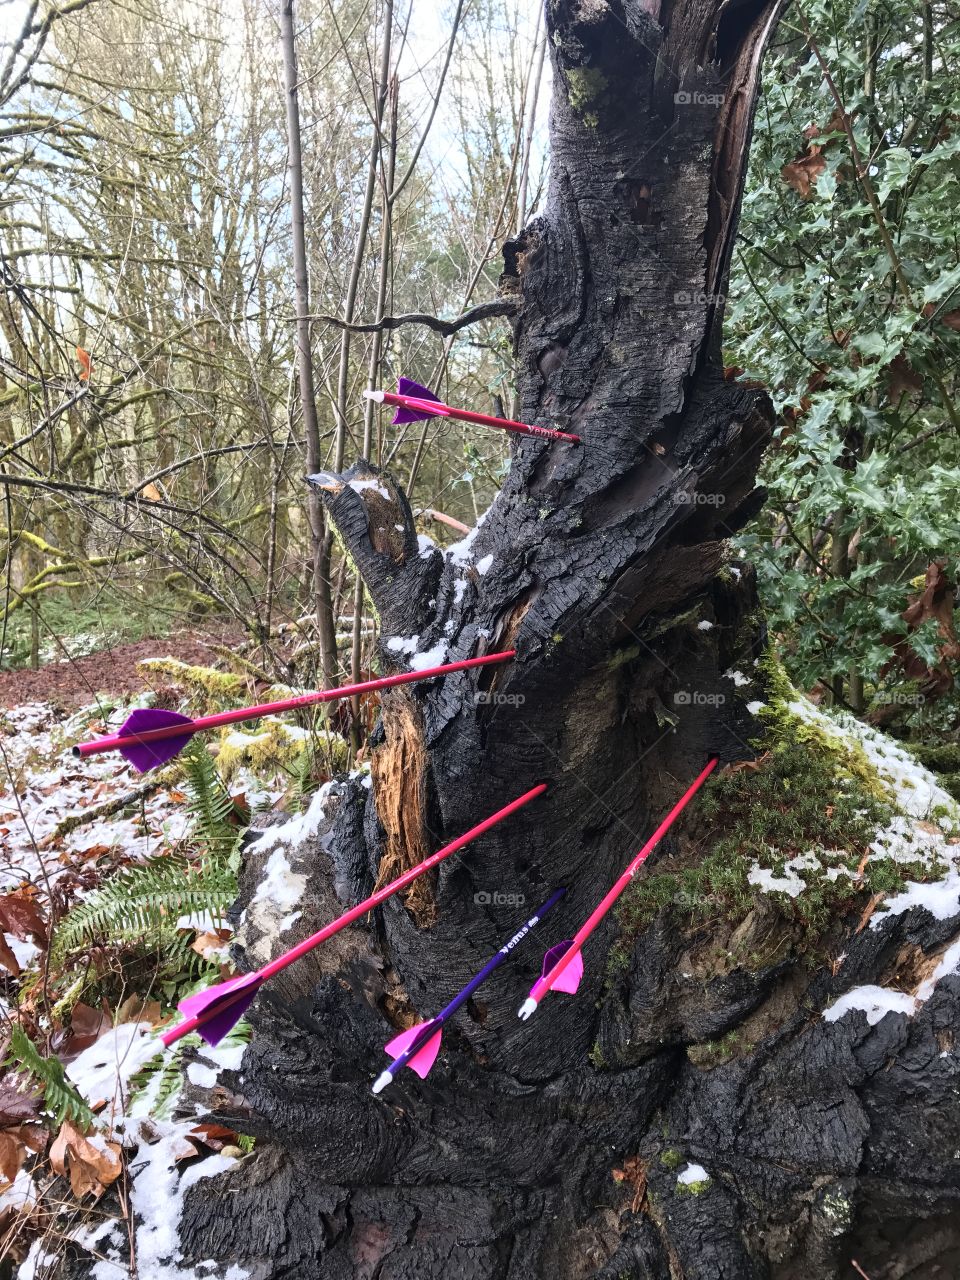 Five pink arrows stuck in a tree branch in the forest